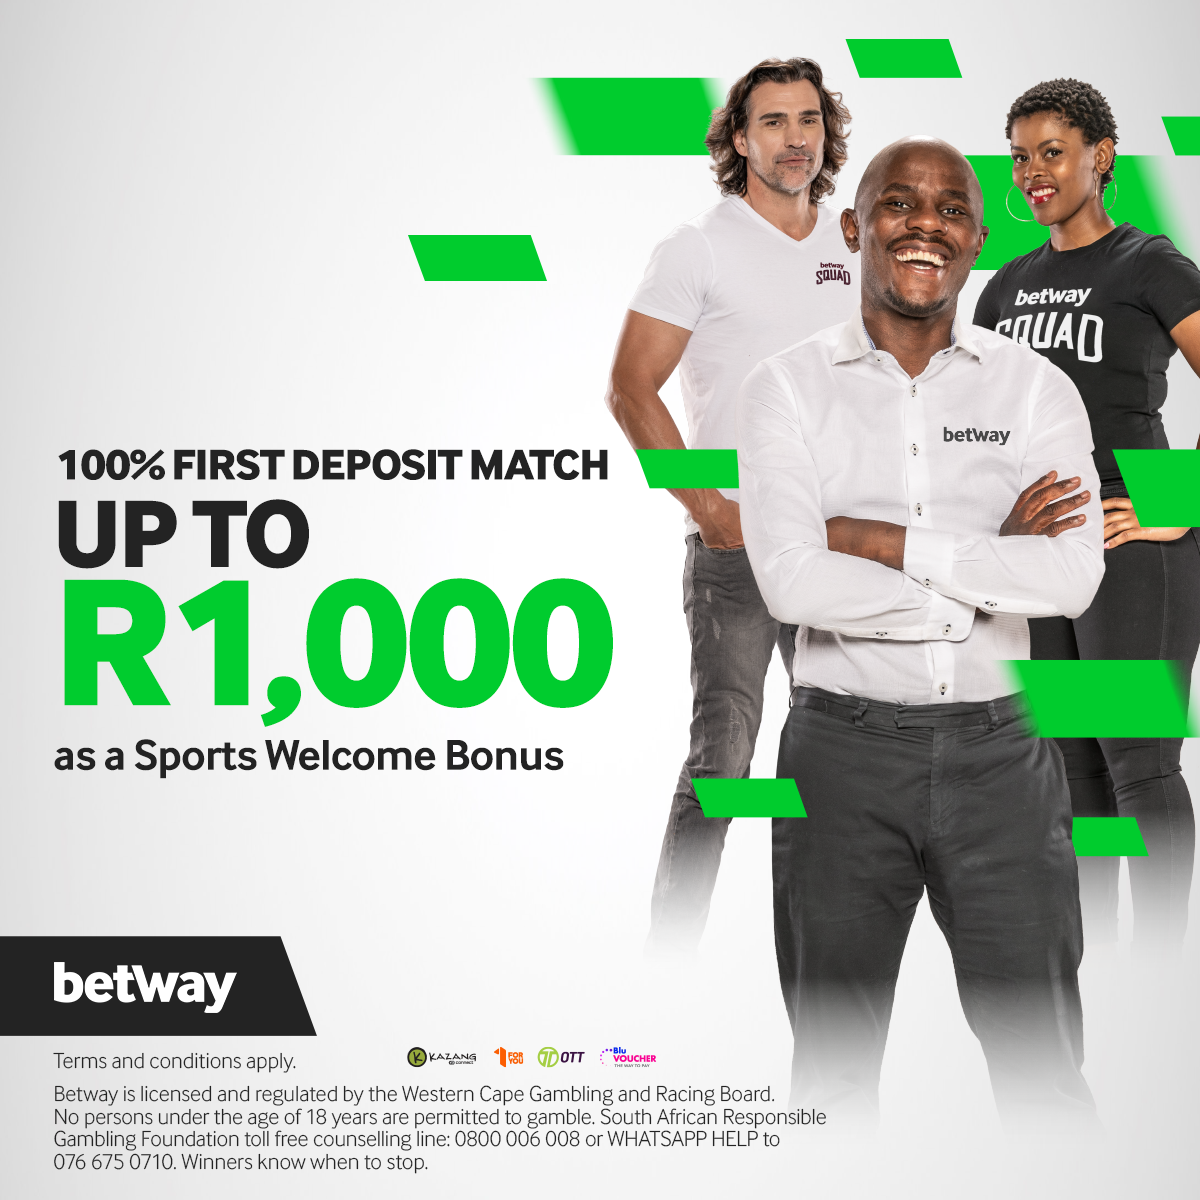 Betway New Player Offer